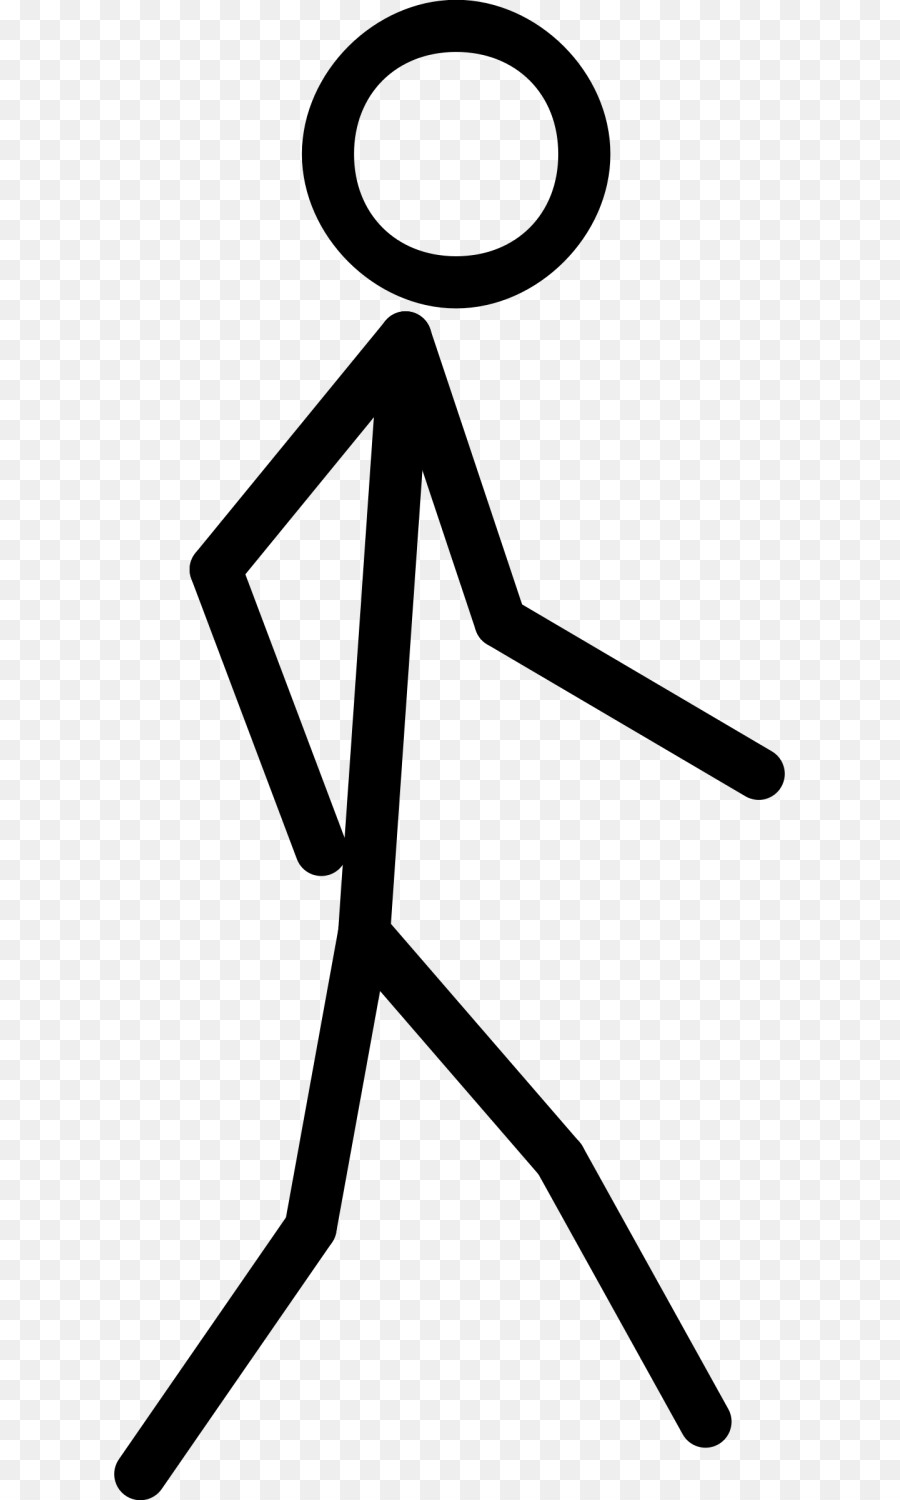 Stick Figure Line png download - 671*1500 - Free Transparent Stick Figure  png Download. - CleanPNG / KissPNG